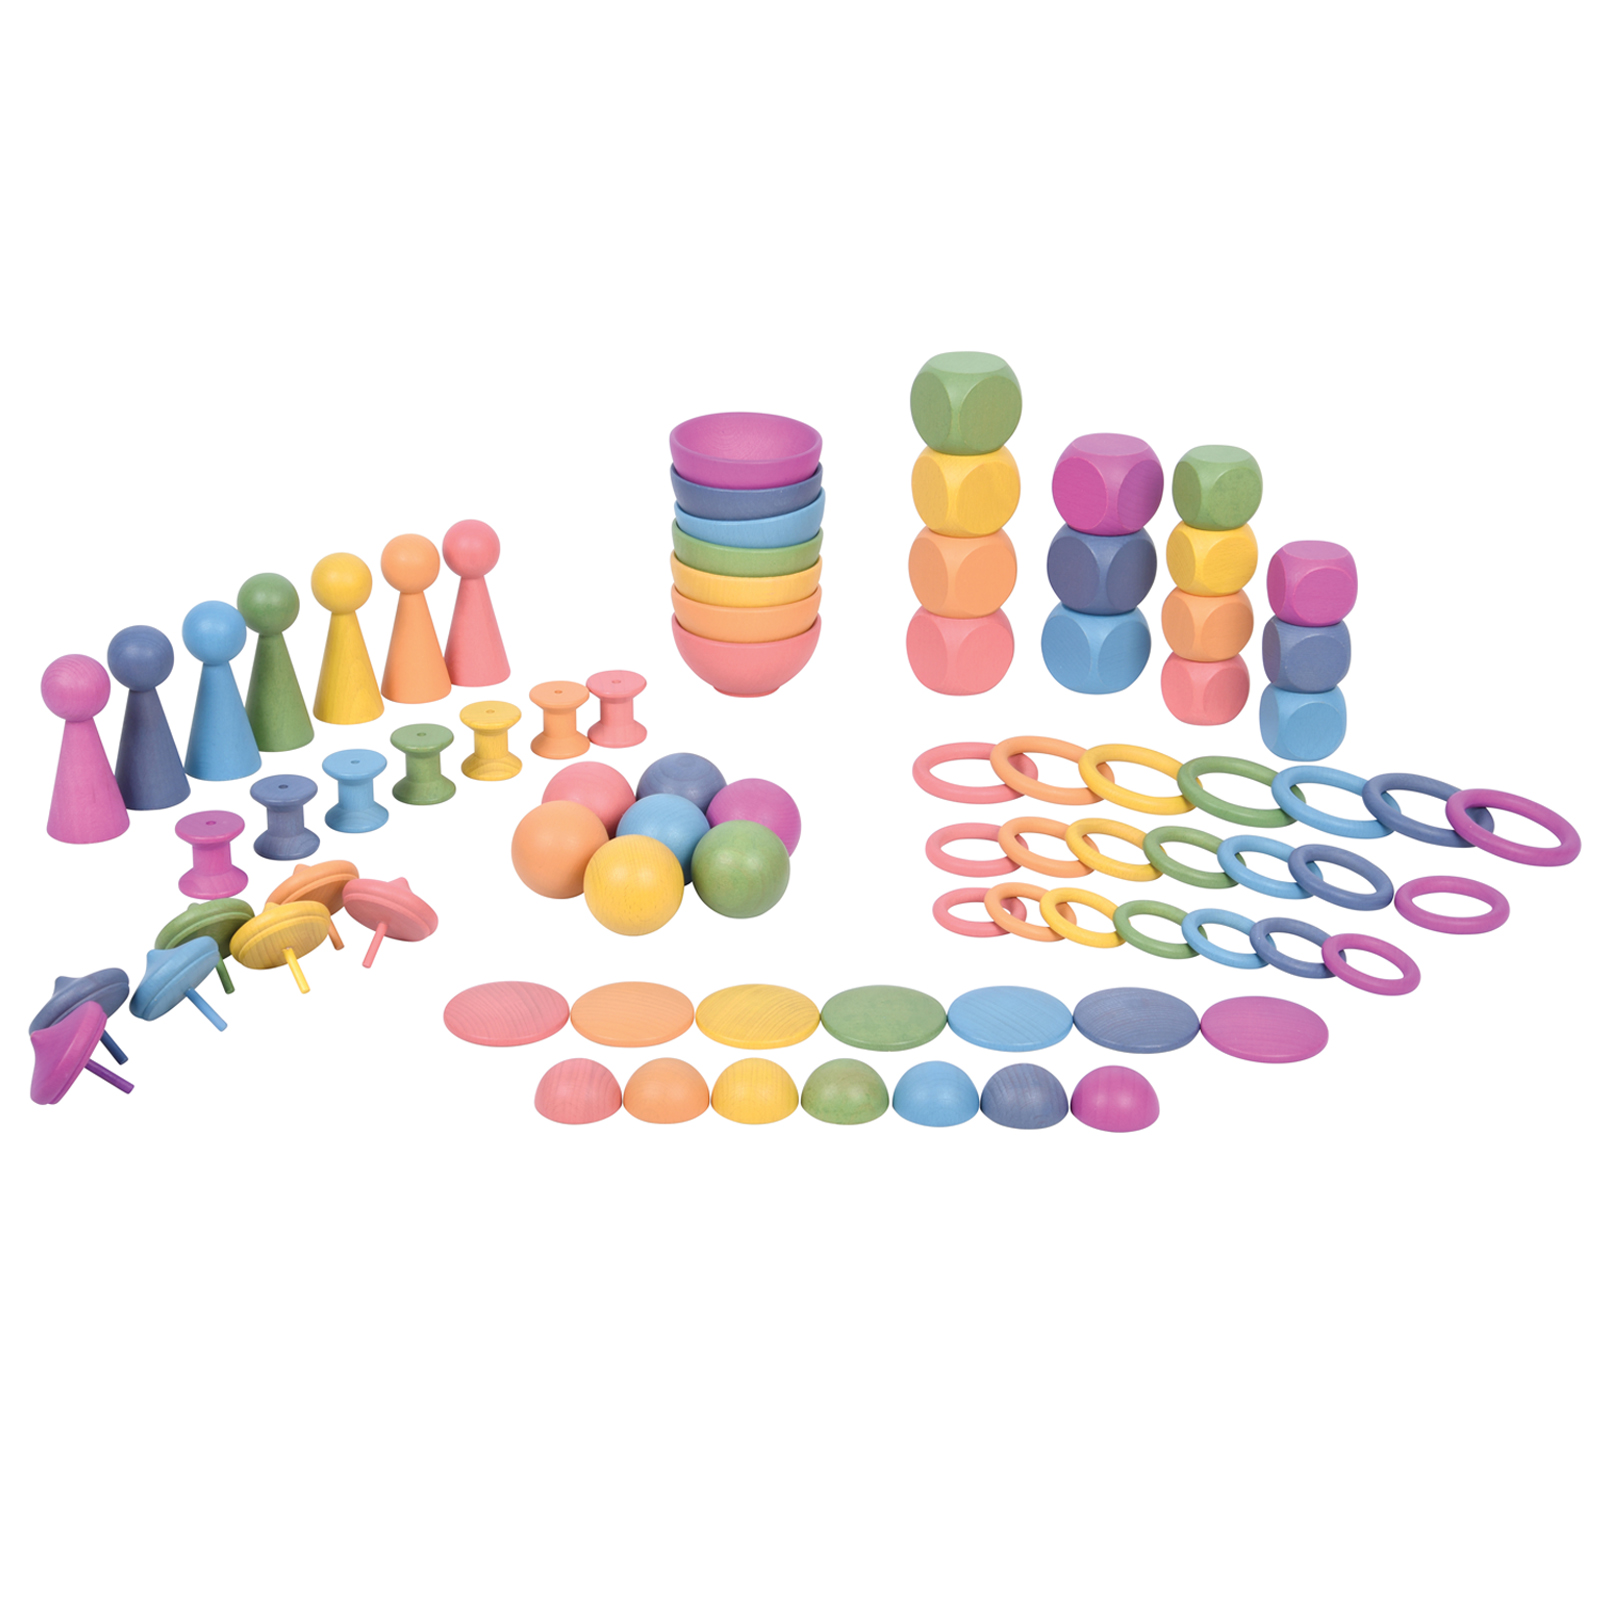 TickiT Rainbow Wooden Super Set - Set of 84 - 12 Different Shapes in 7 Colors